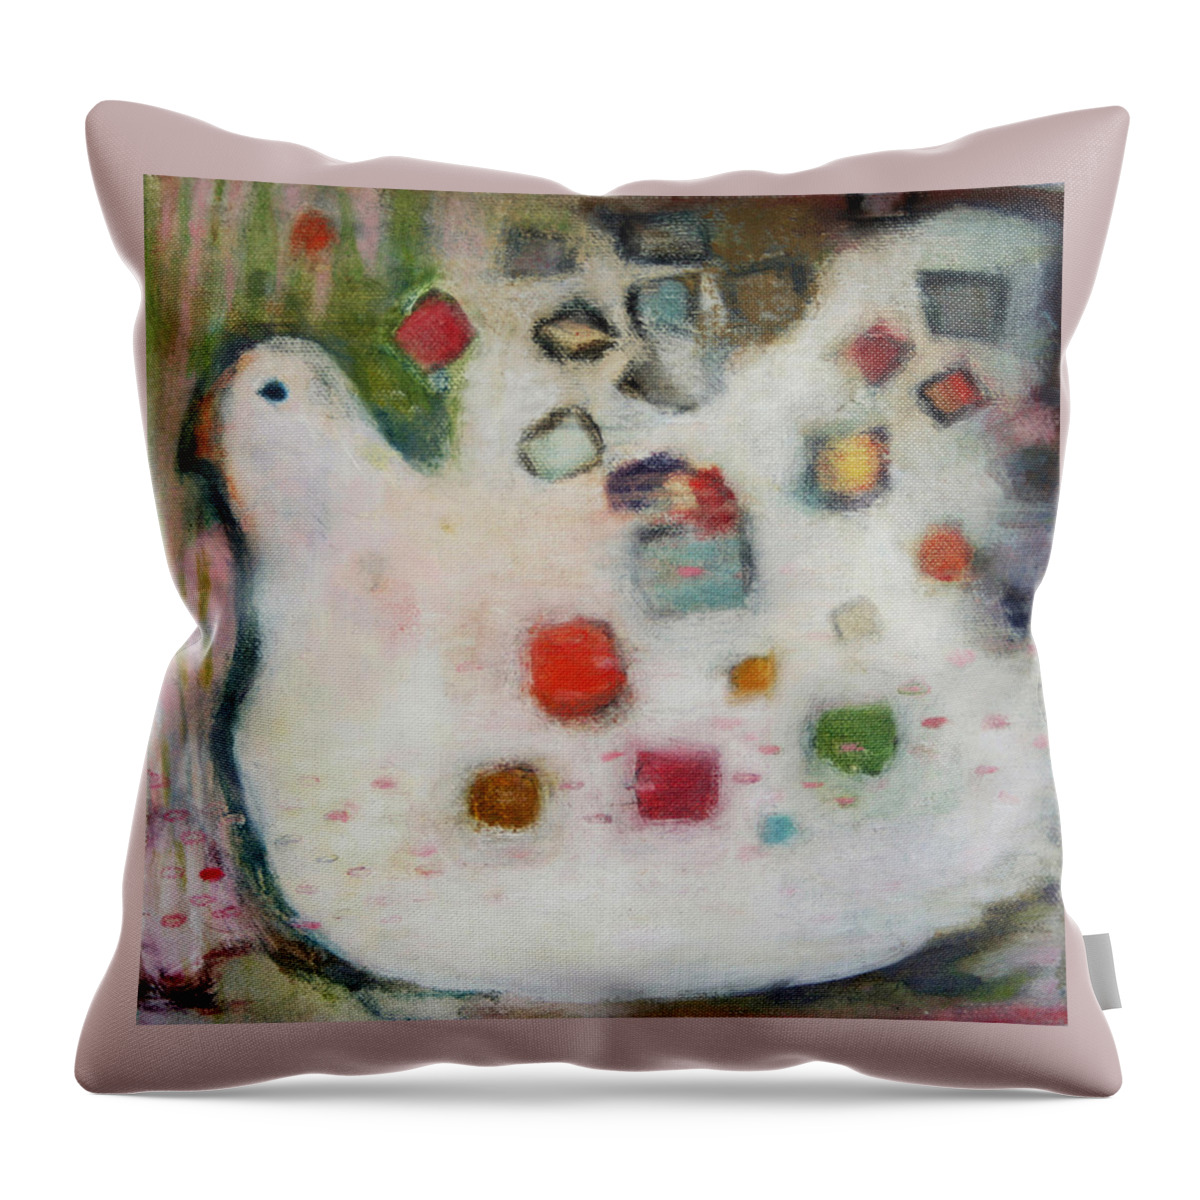 Hen Throw Pillow featuring the painting Dreaming Hen by Janet Zoya